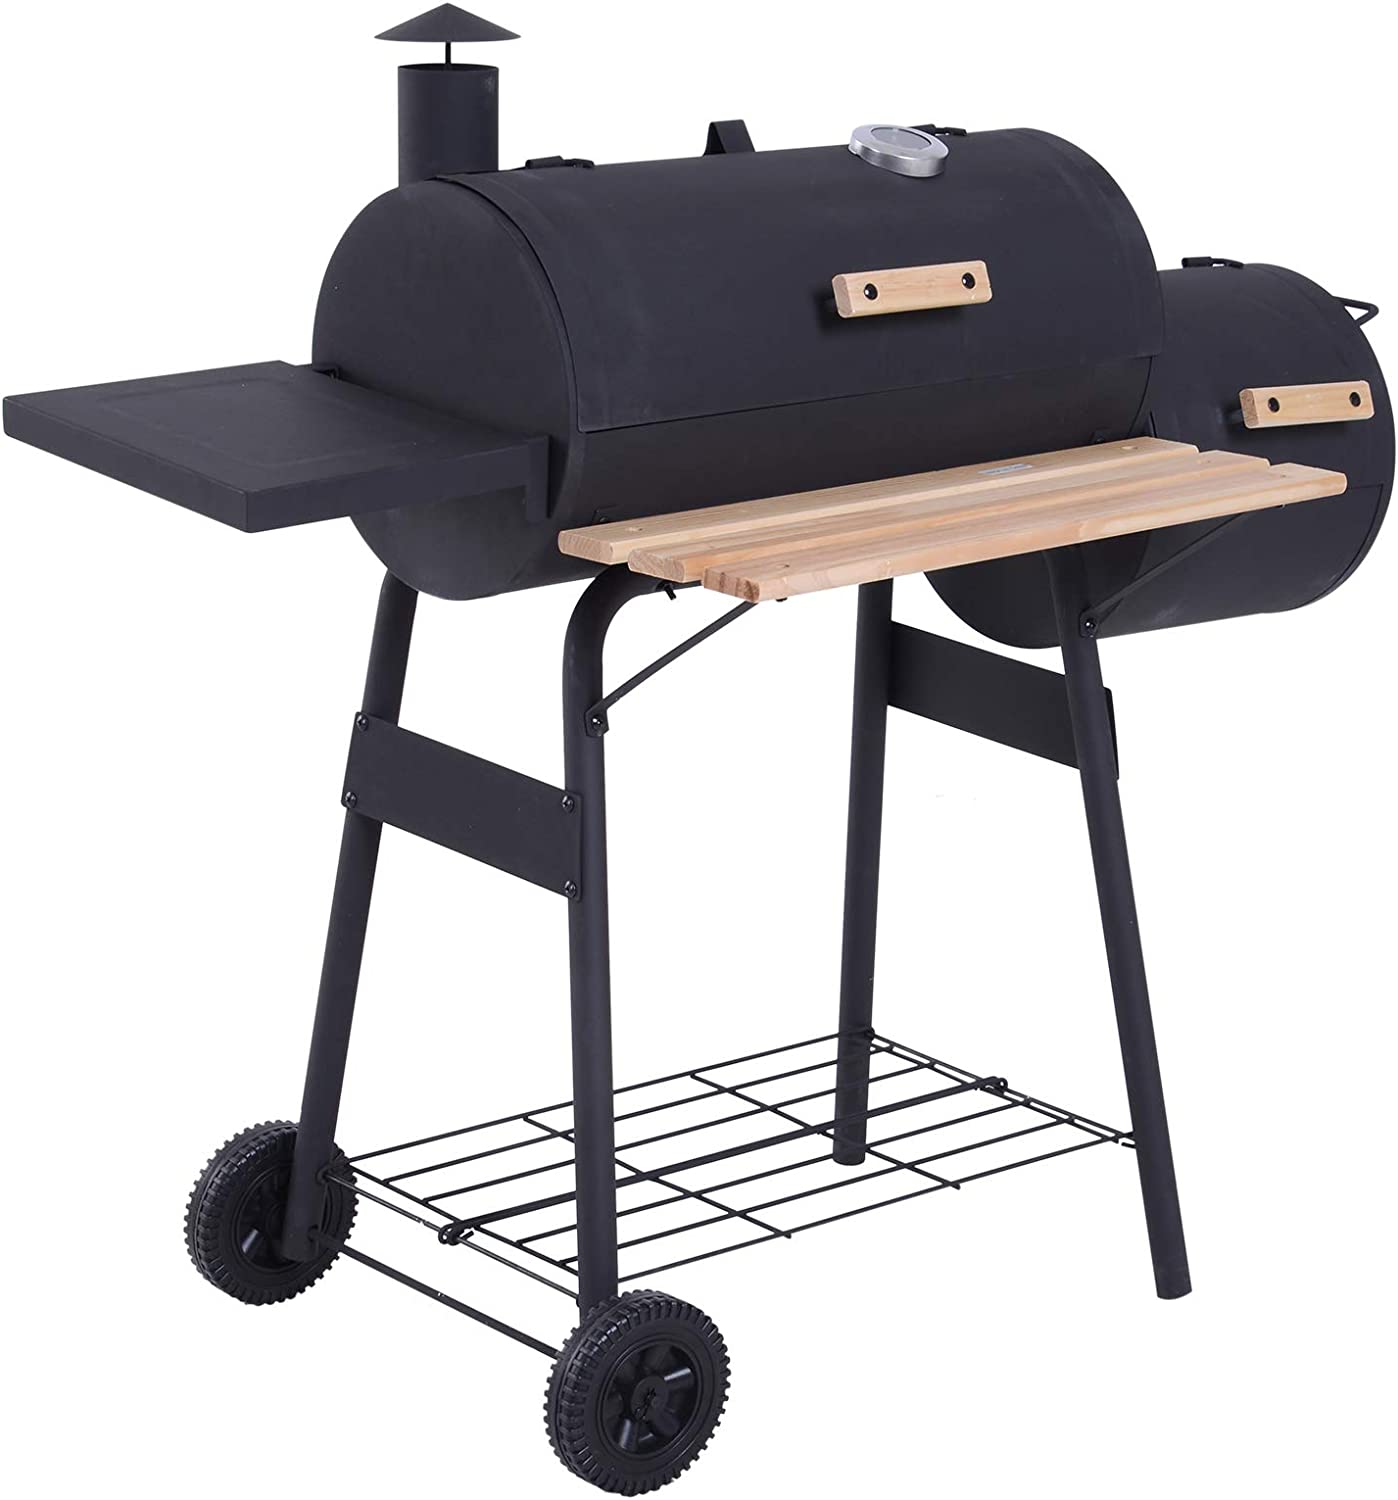 Outsunny Steel Portable Backyard Charcoal BBQ Grill and Offset Smoker